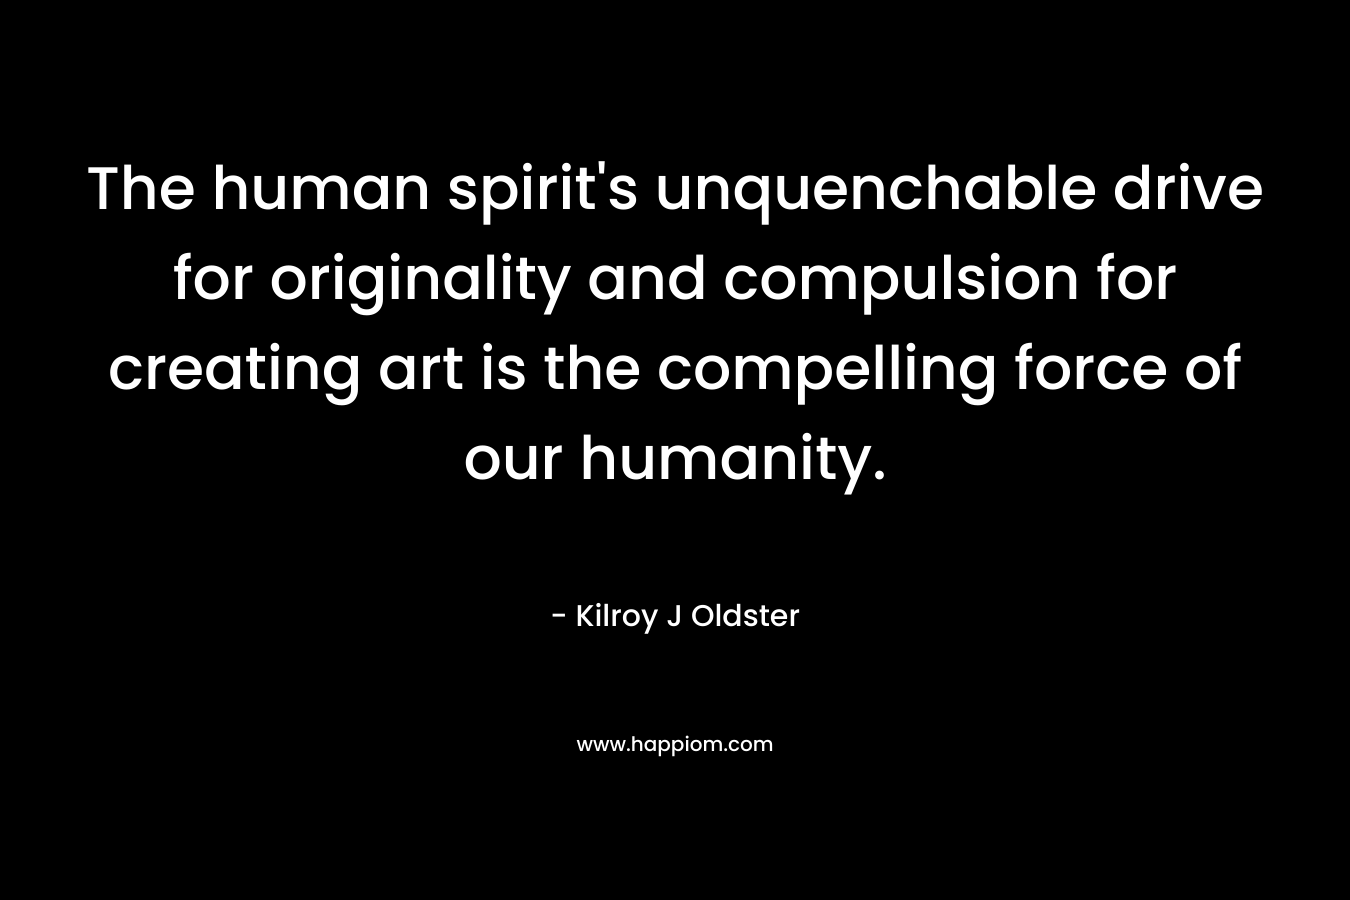 The human spirit's unquenchable drive for originality and compulsion for creating art is the compelling force of our humanity.